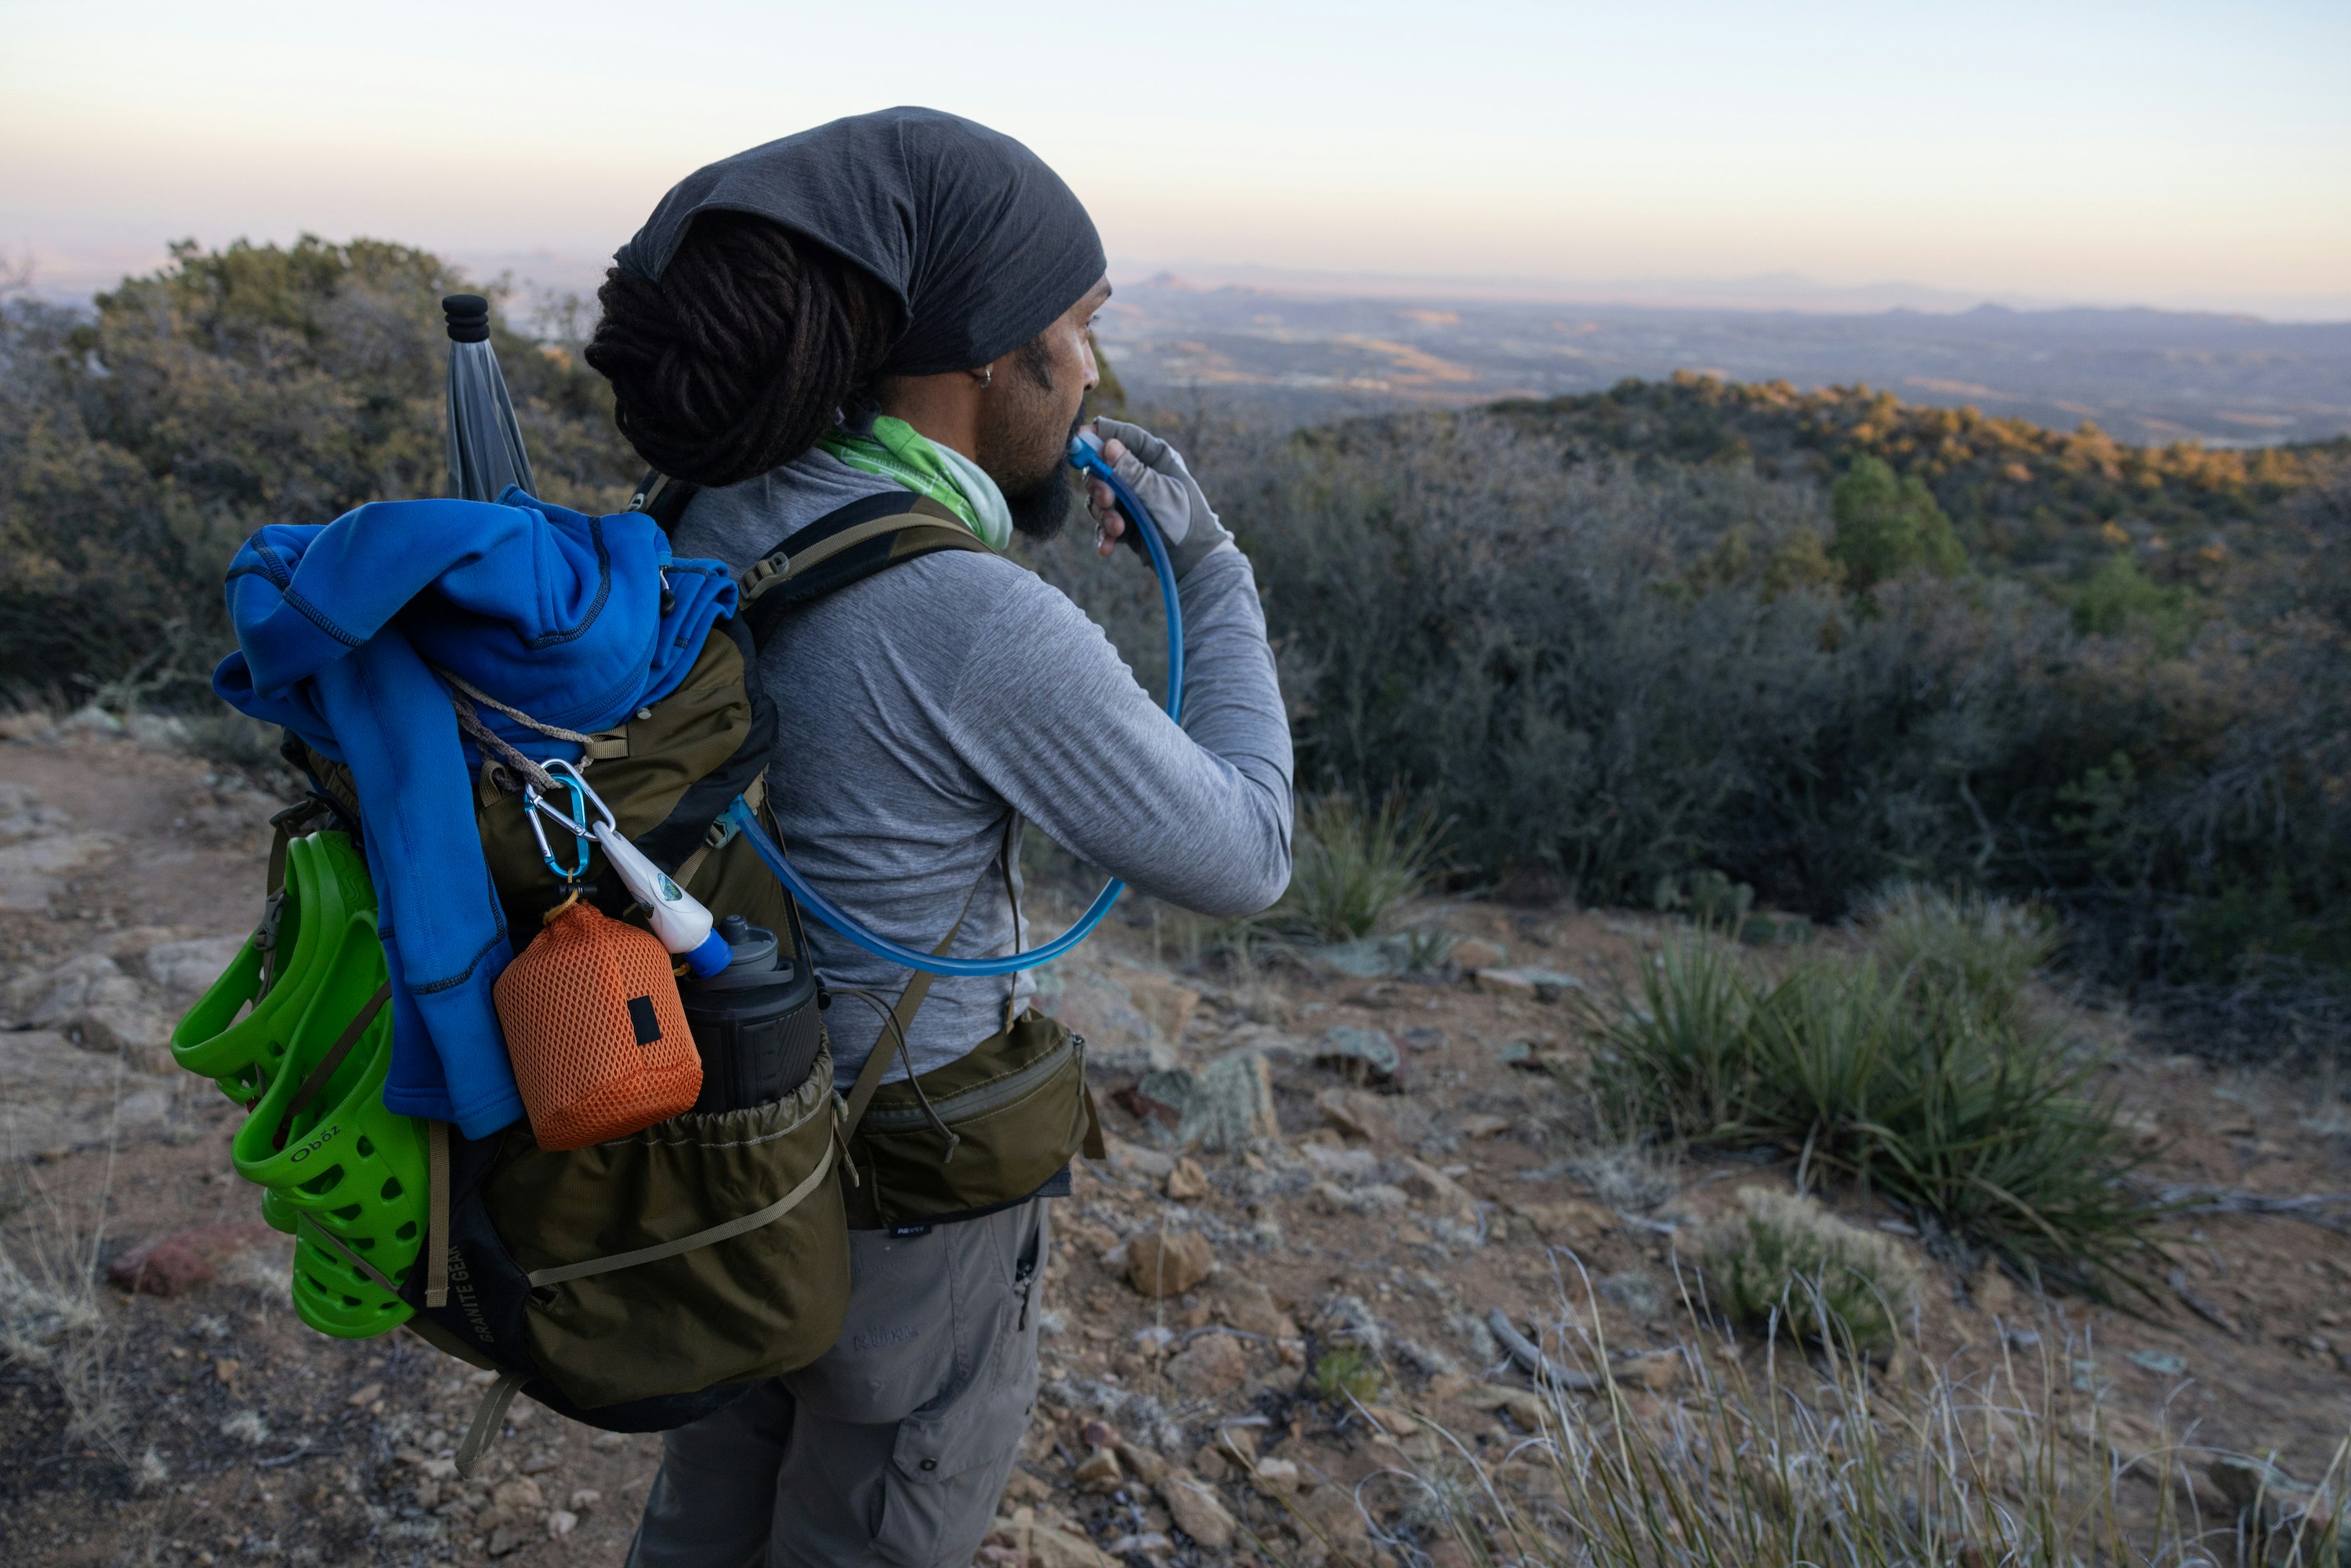 Derick Lugo drinking water out of his pack while thru hiking on a desert trail of the Continental Divide Trail